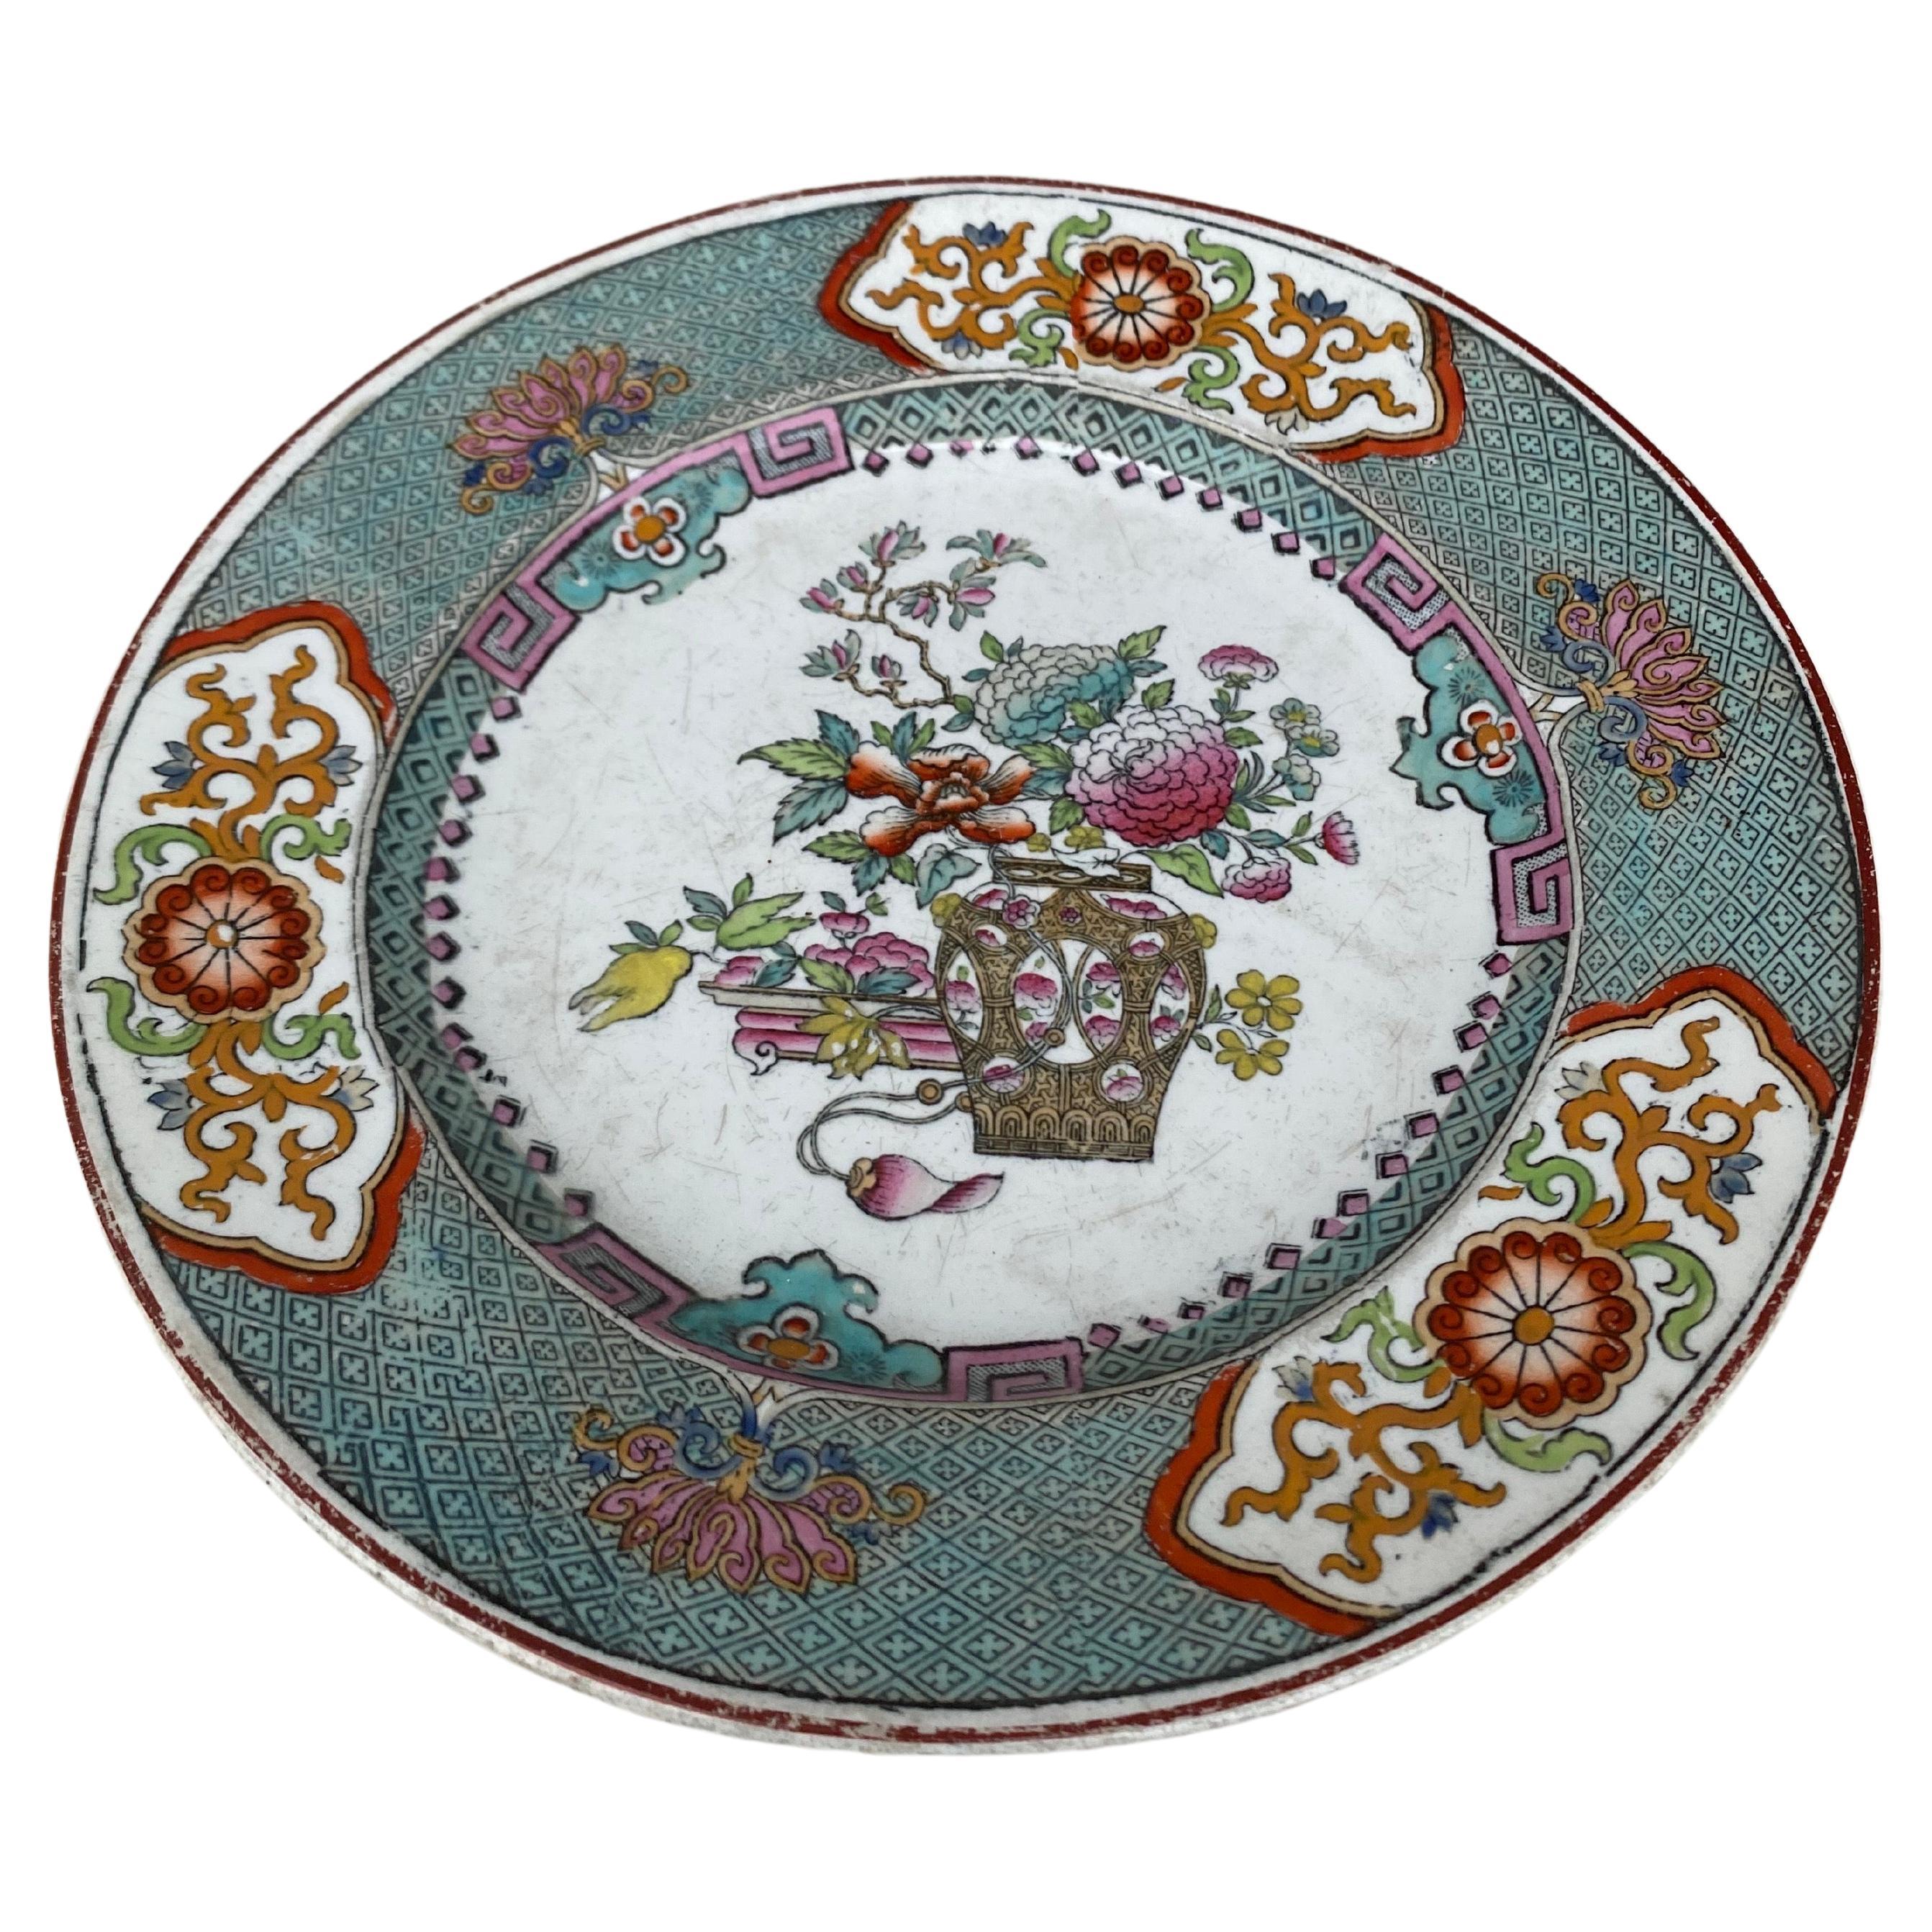 19th Century English Chinoiserie plate signed Copeland.